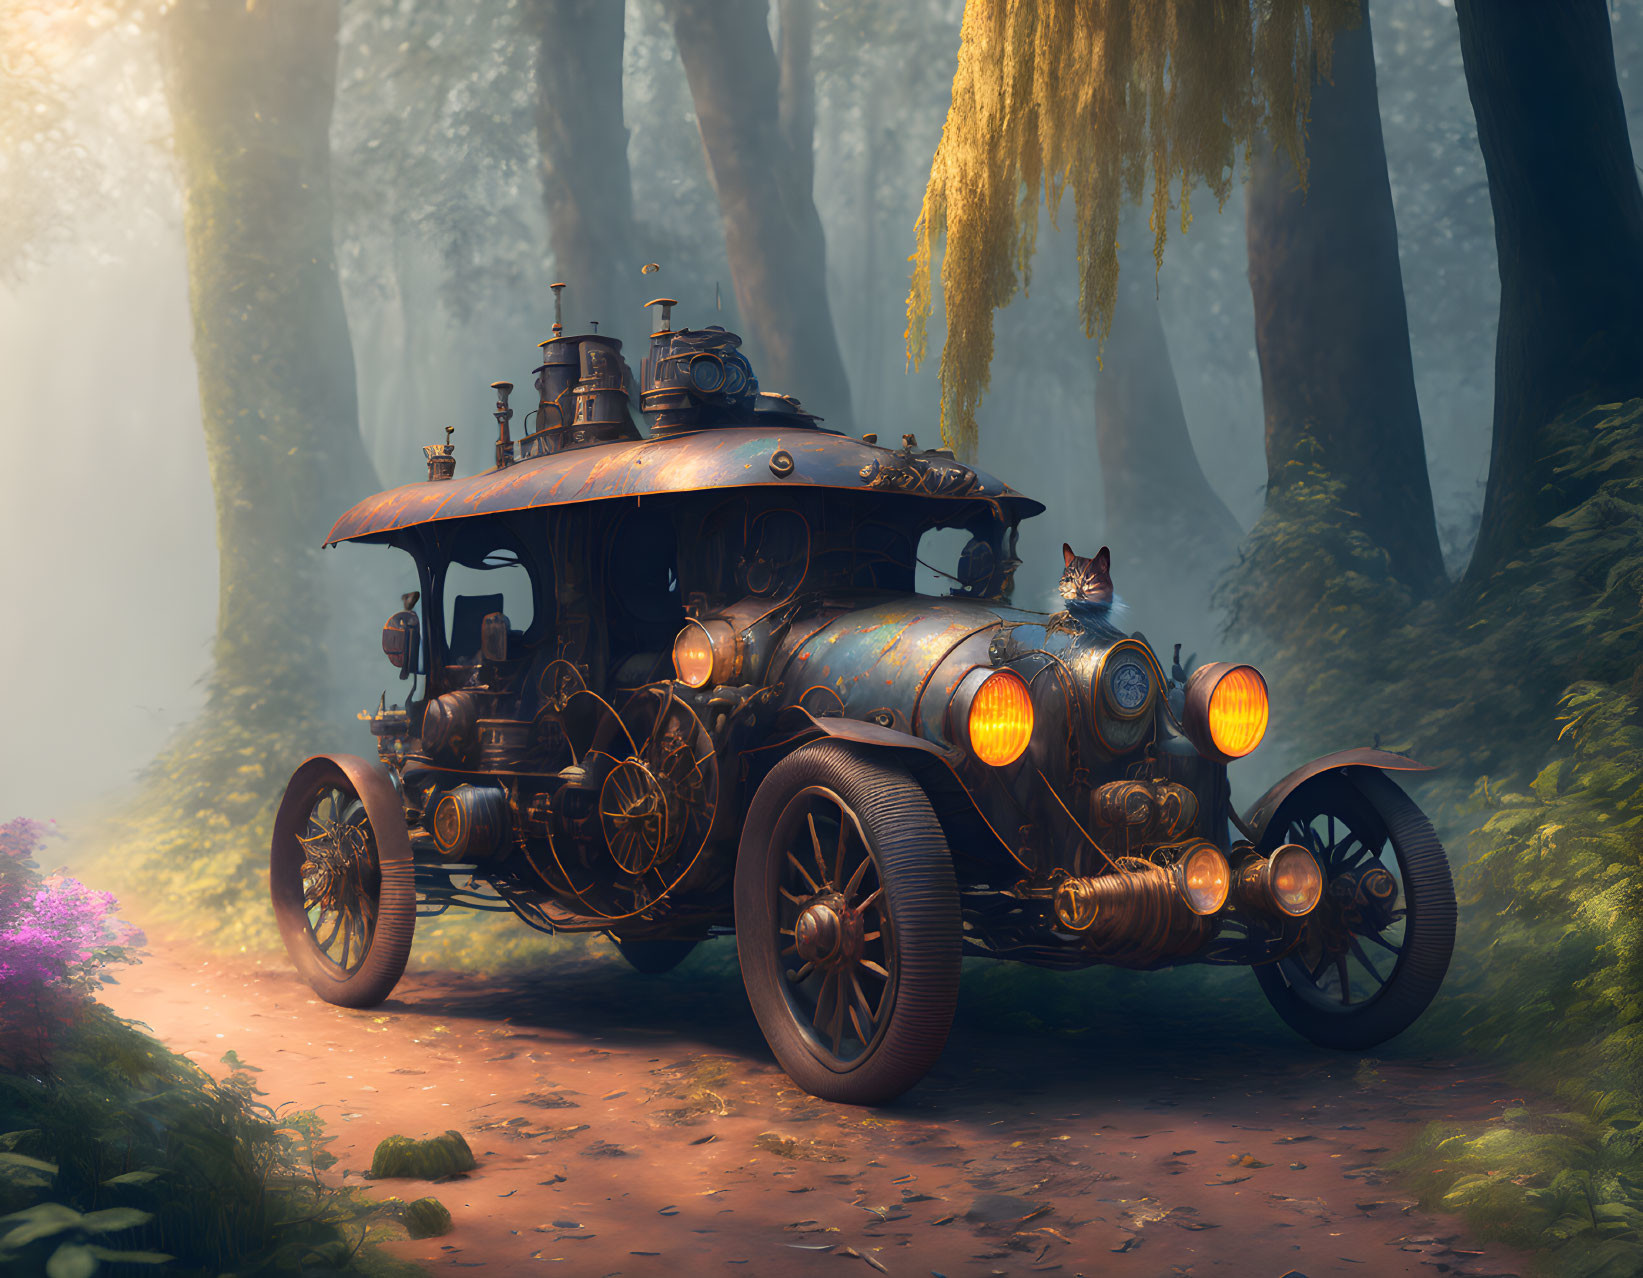 Steampunk-style vehicle with gears and pipes in misty forest.